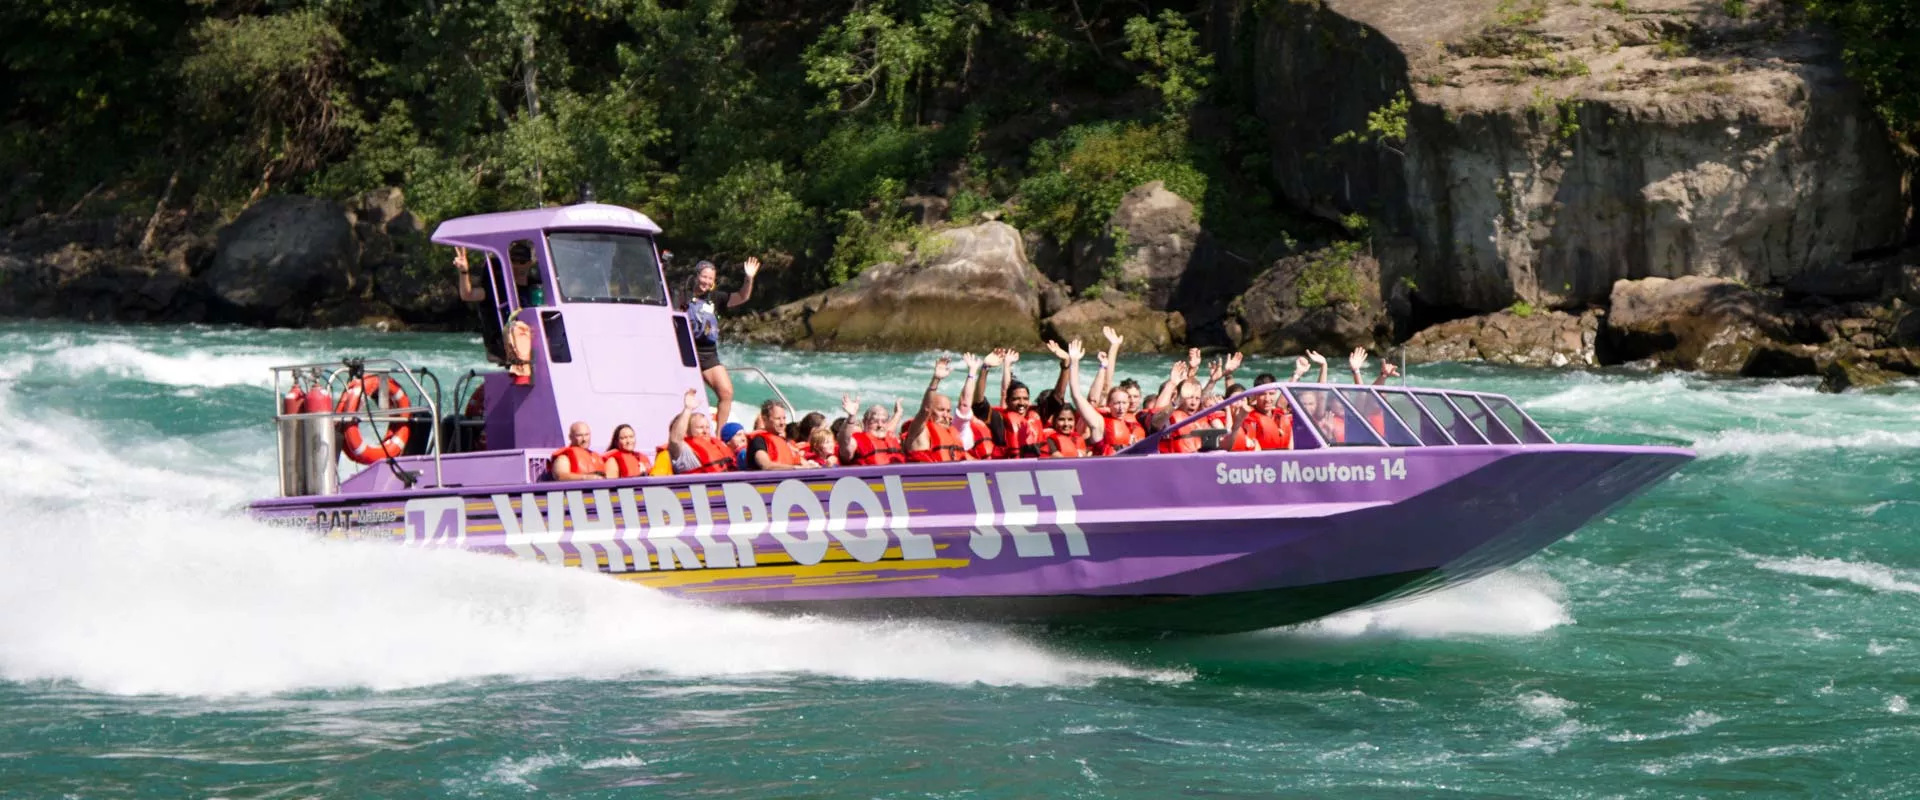 Whirlpool Jet Boat Tours in Canada, North America | Excursions - Rated 3.9